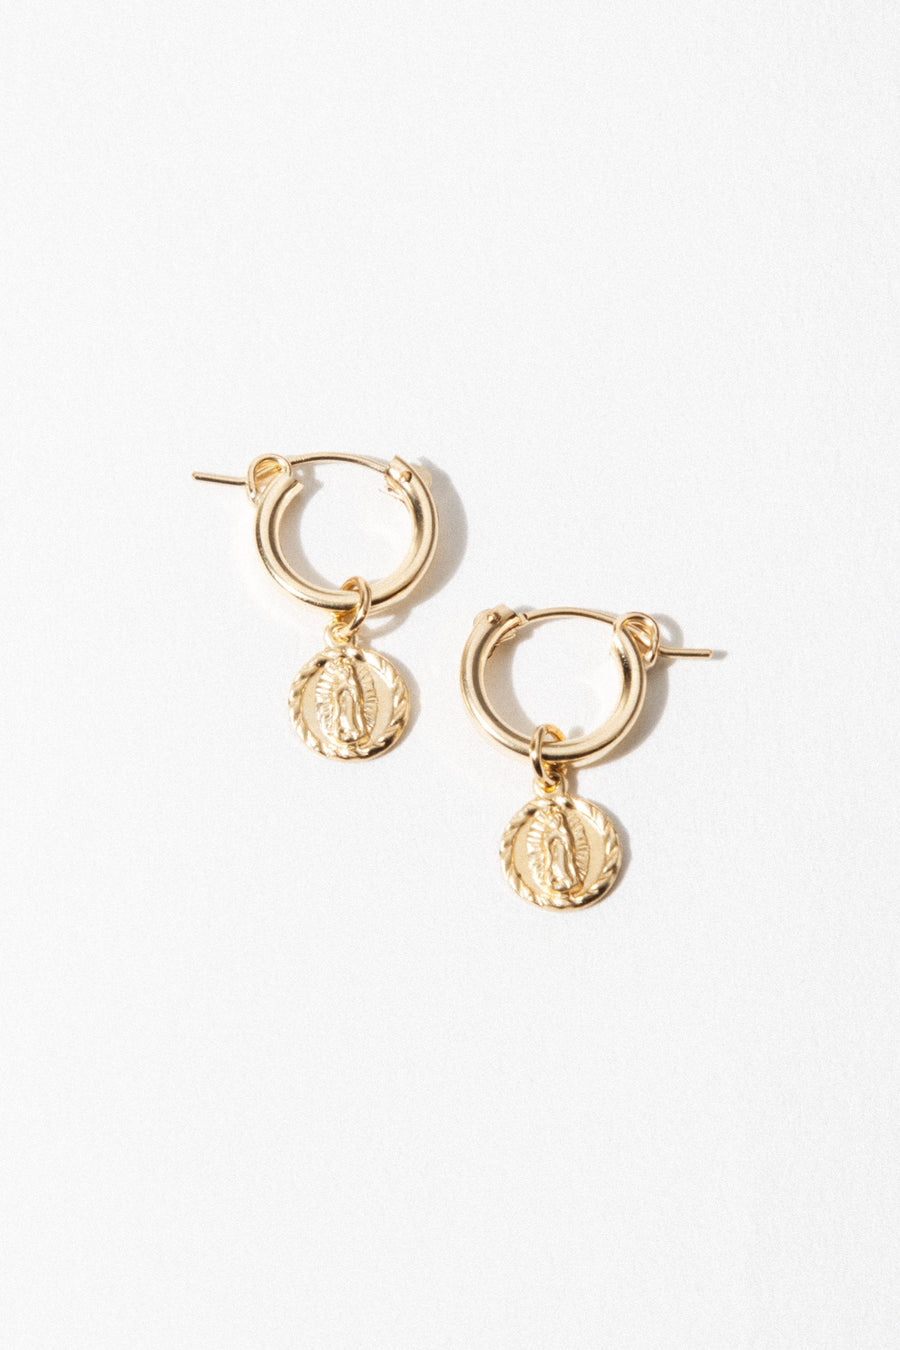 CGM Jewelry Gold / Hoop Lady Guadalupe Earrings